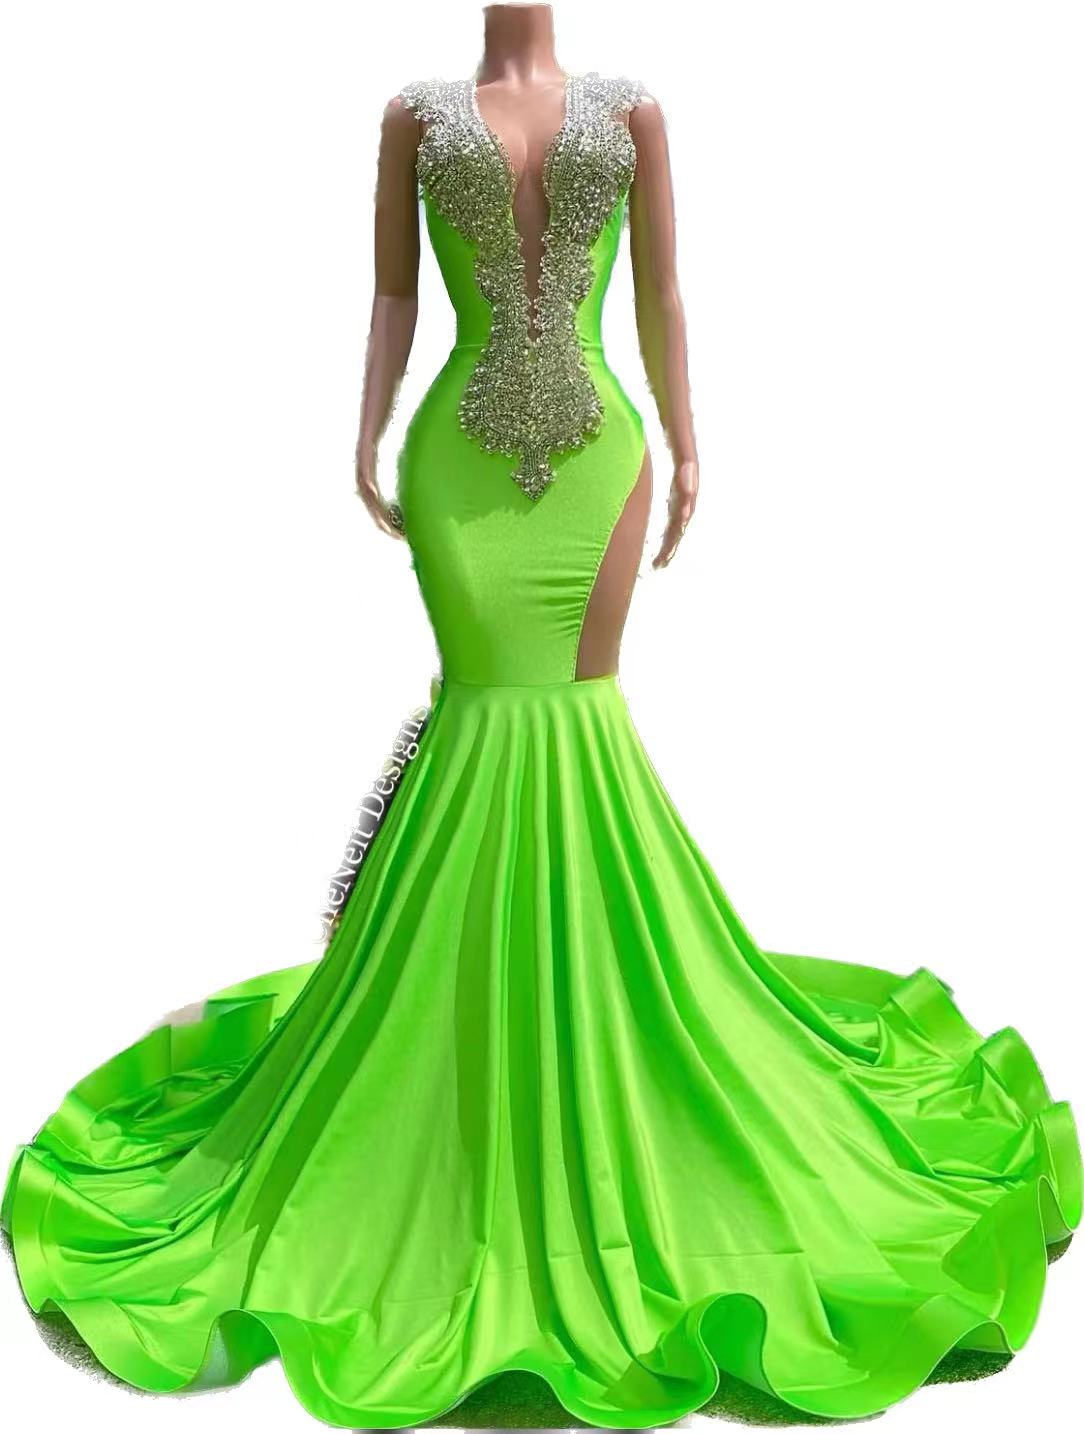 2023 Green Sparkly Sequin Mermaid African Prom Dresses Deep V neck Crystals Black Girls Long Graduation Dress Plus Size Formal Evening Gowns GW0228